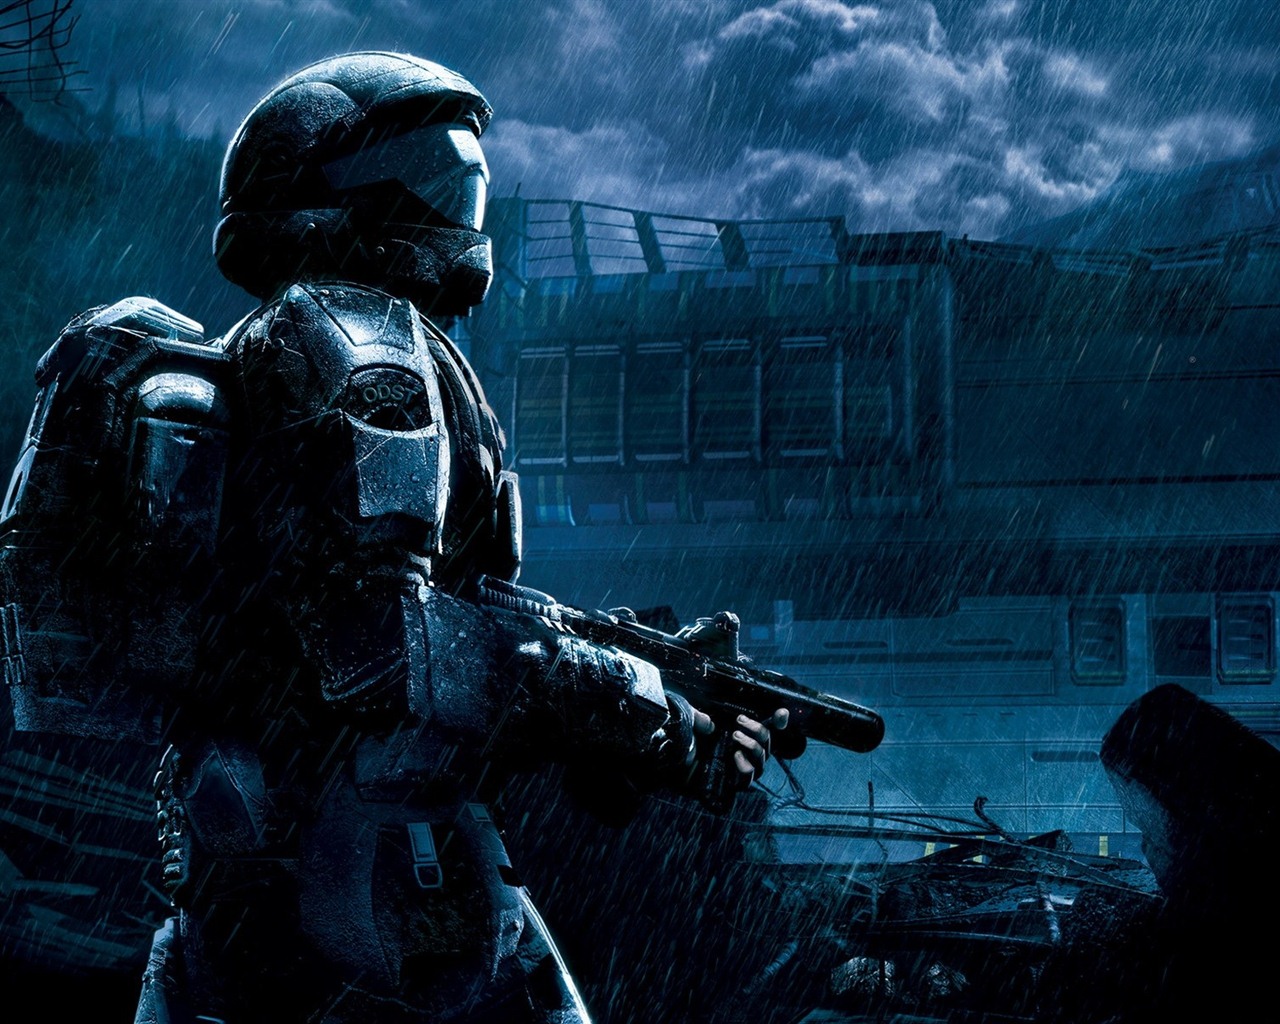 Halo game HD wallpapers #5 - 1280x1024